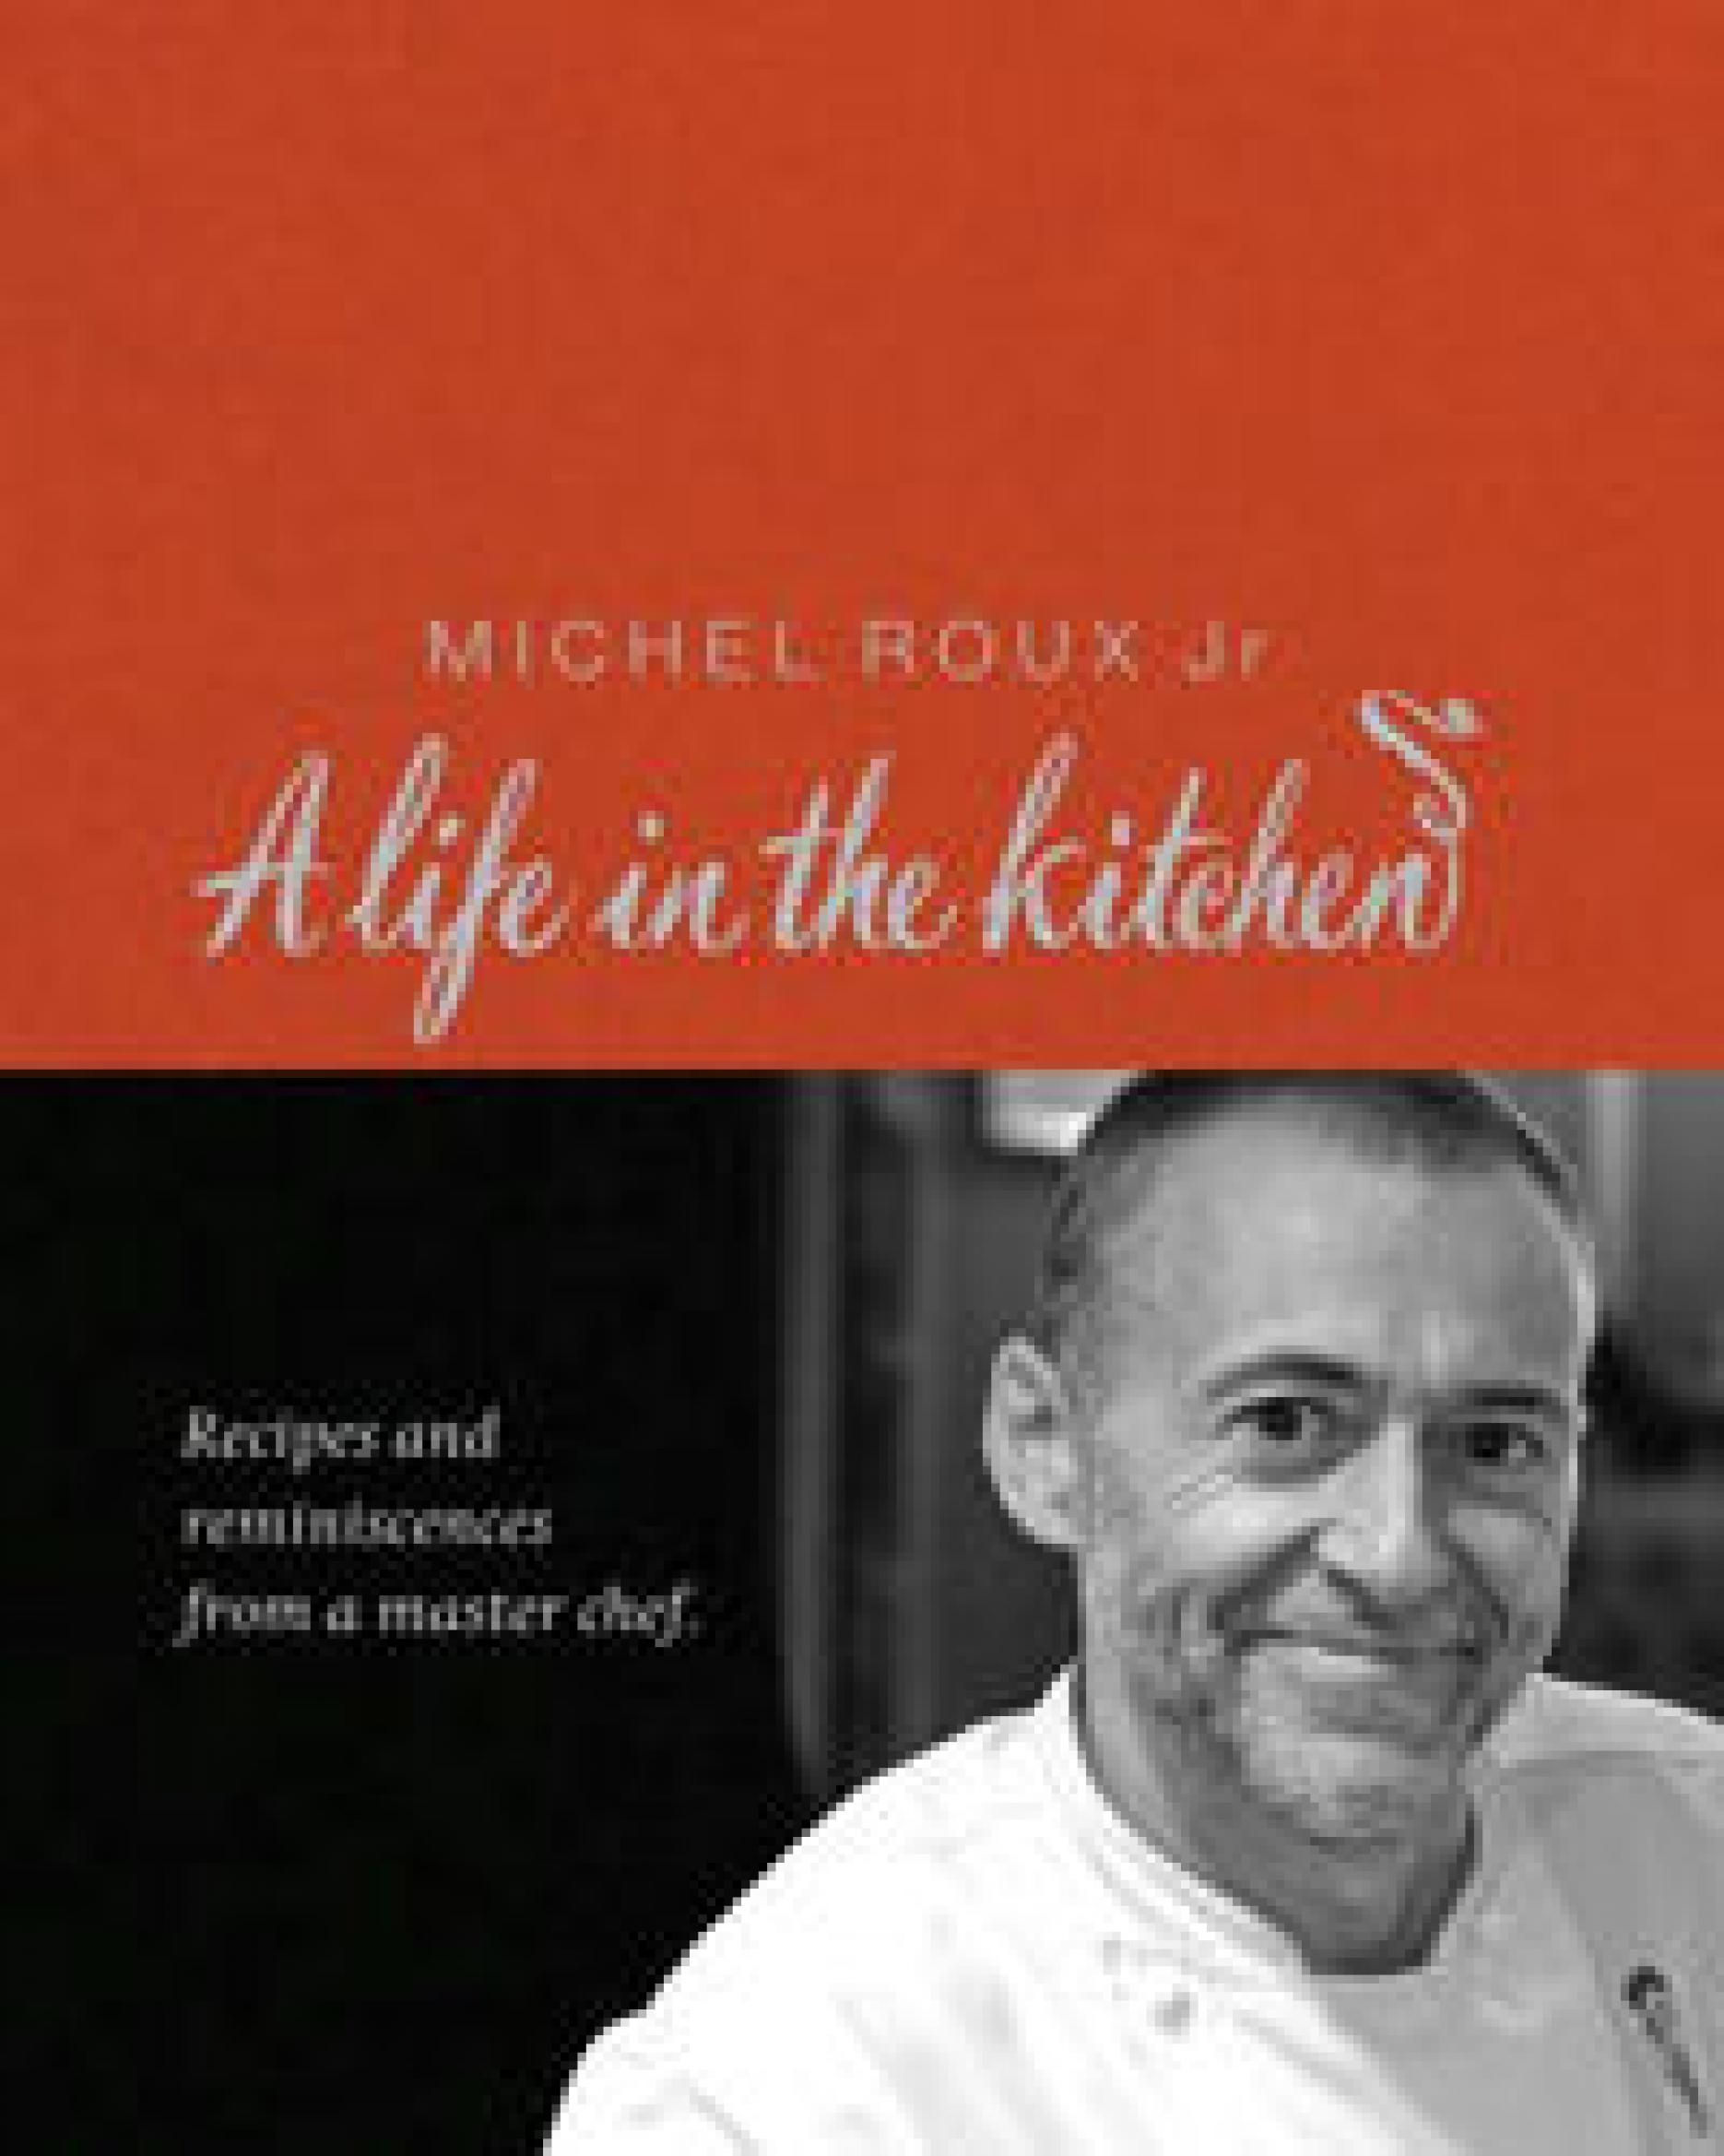 Win Michel Roux Jr's brand new book worth £25 | Craft Guild of Chefs